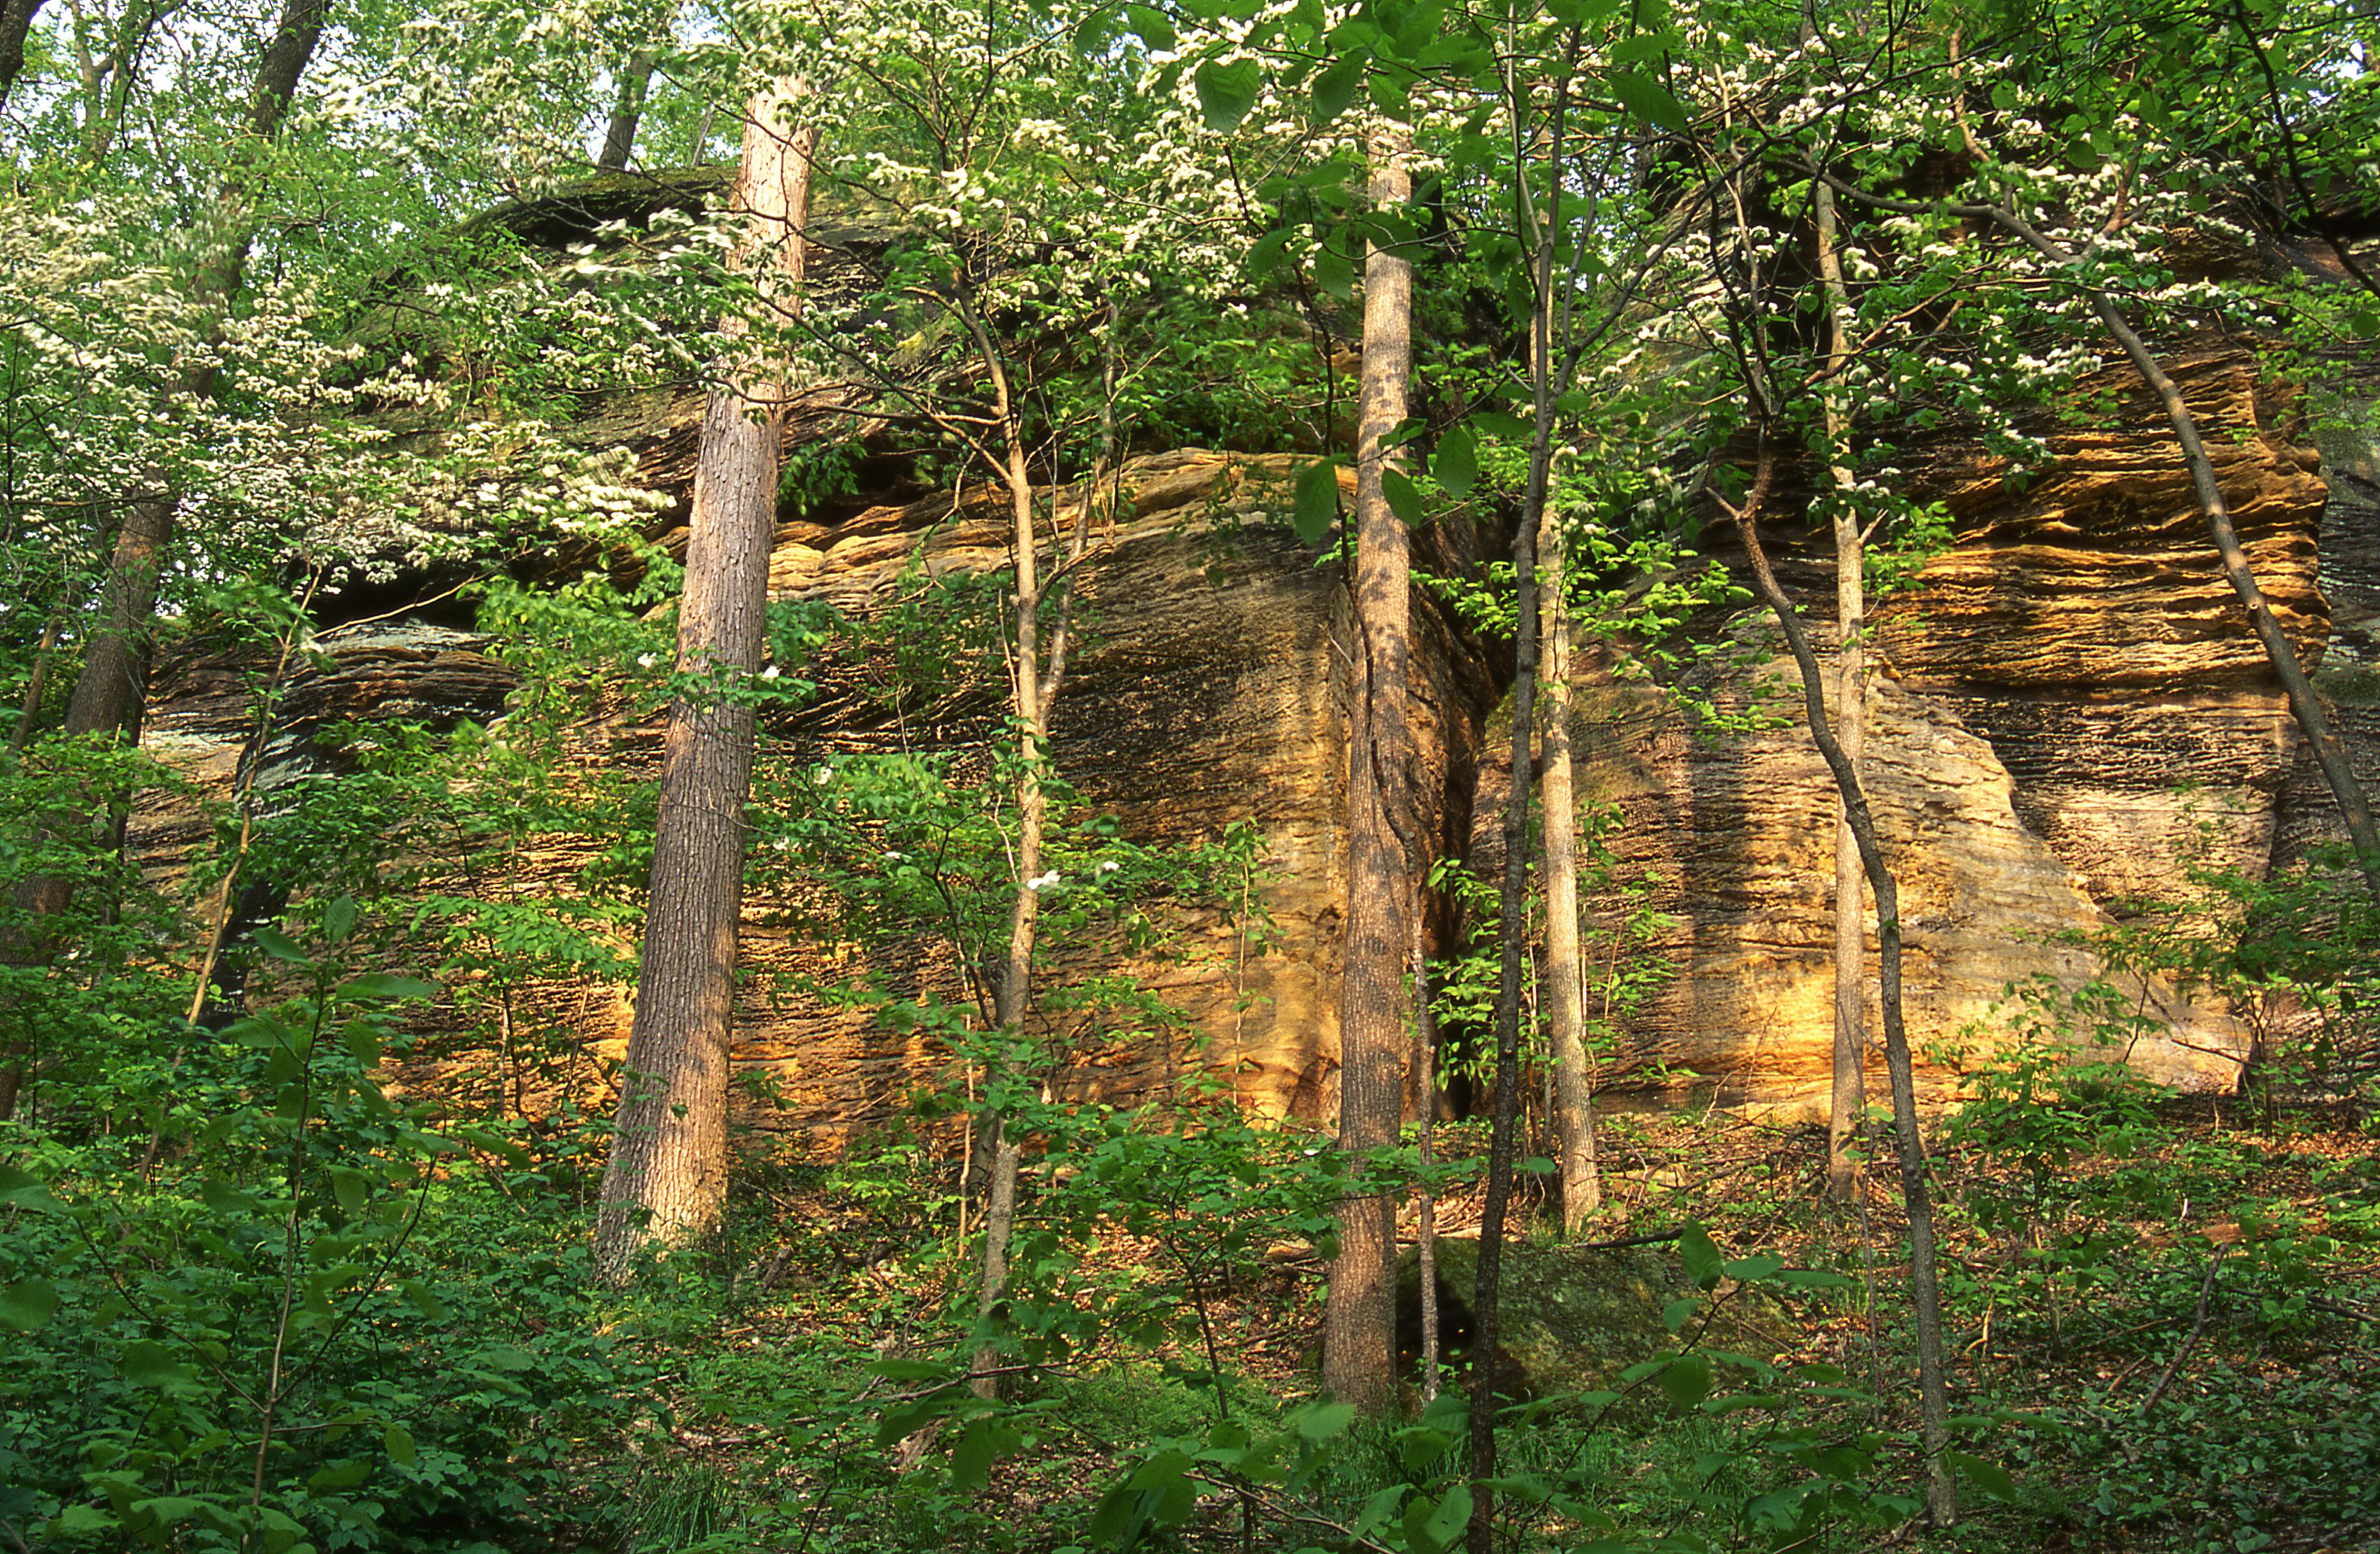 Cuyahoga Valley National Park: 10th Most Visited U.S. National